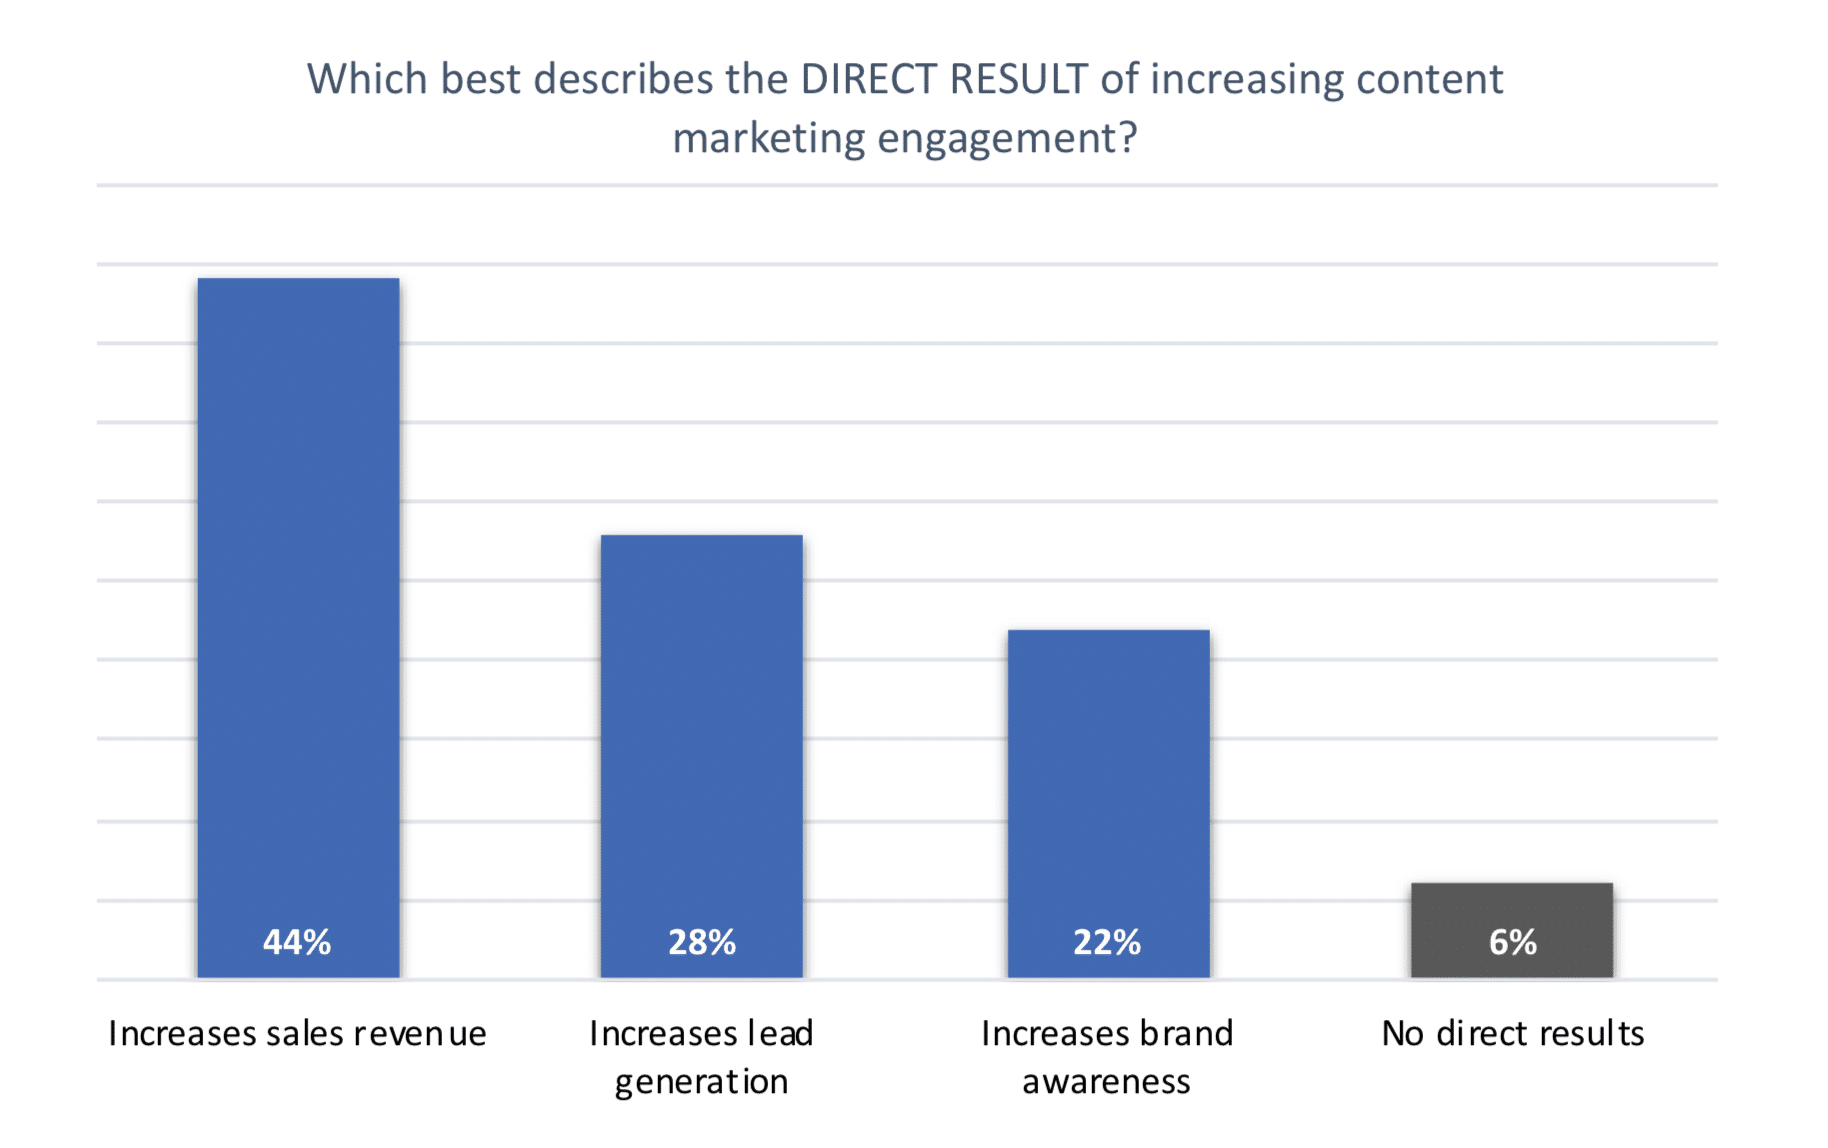 chart showing the direct results achieved from increasing content marketing engagement 